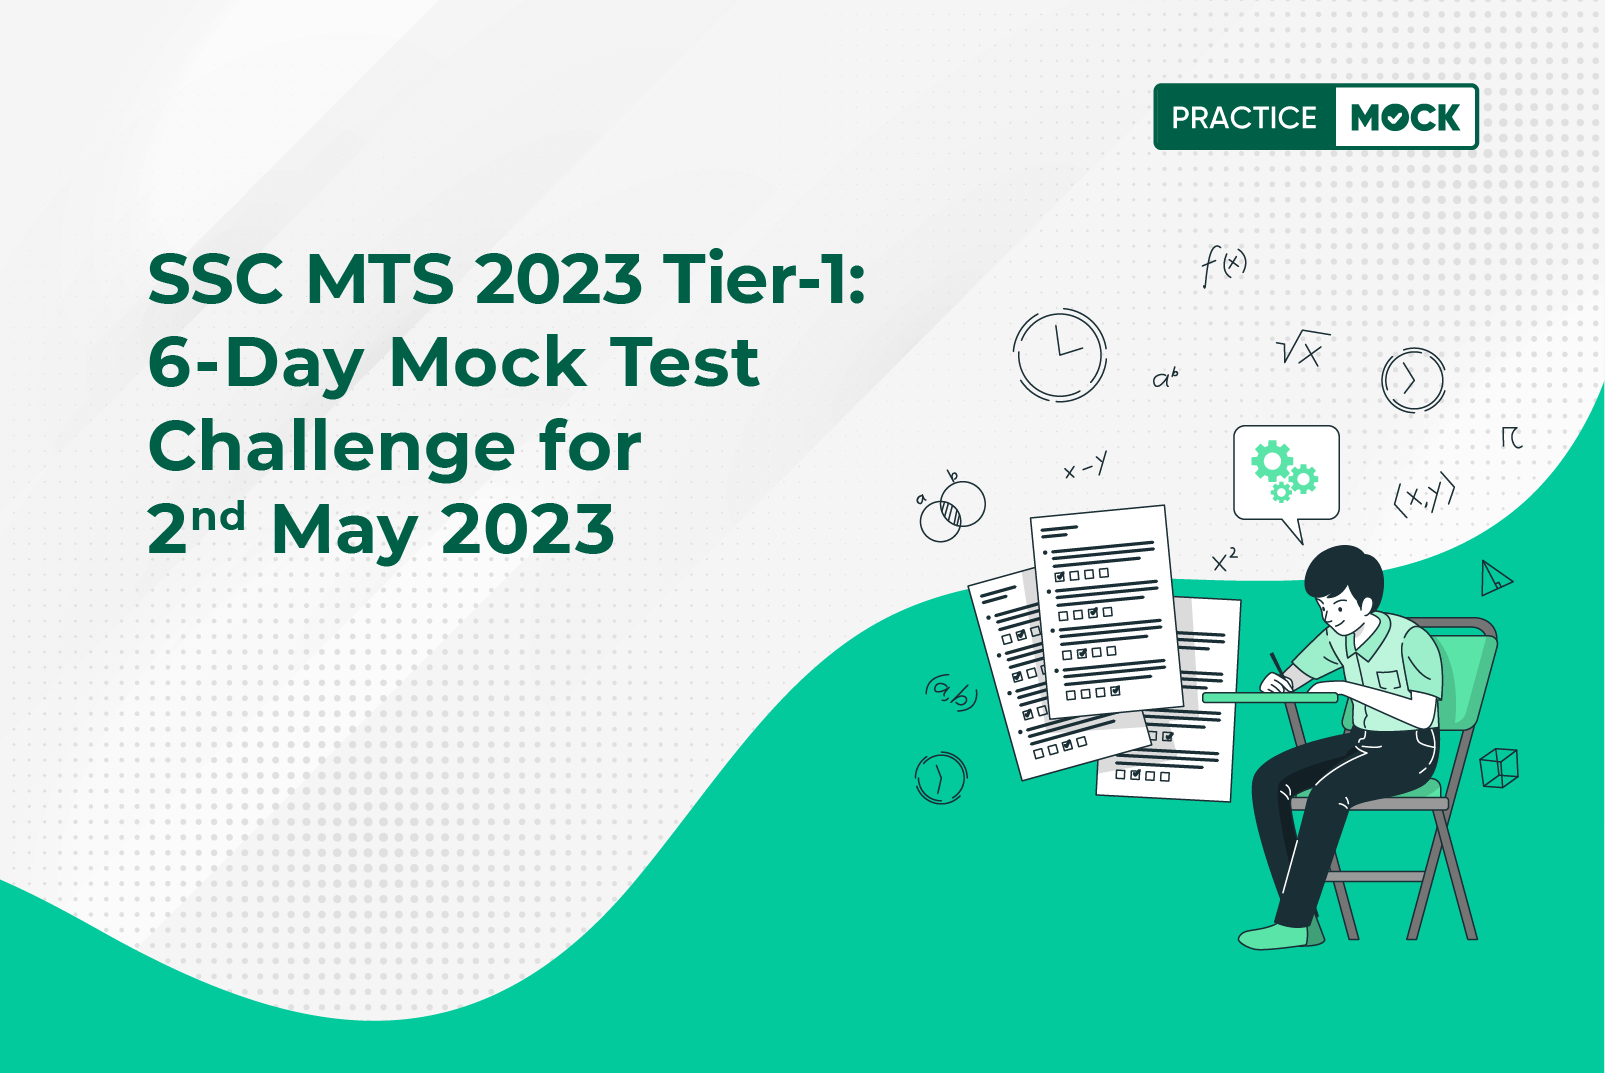 SSC MTS 2023 Tier-1: 6-Day Mock Test Challenge for 2nd May 2023